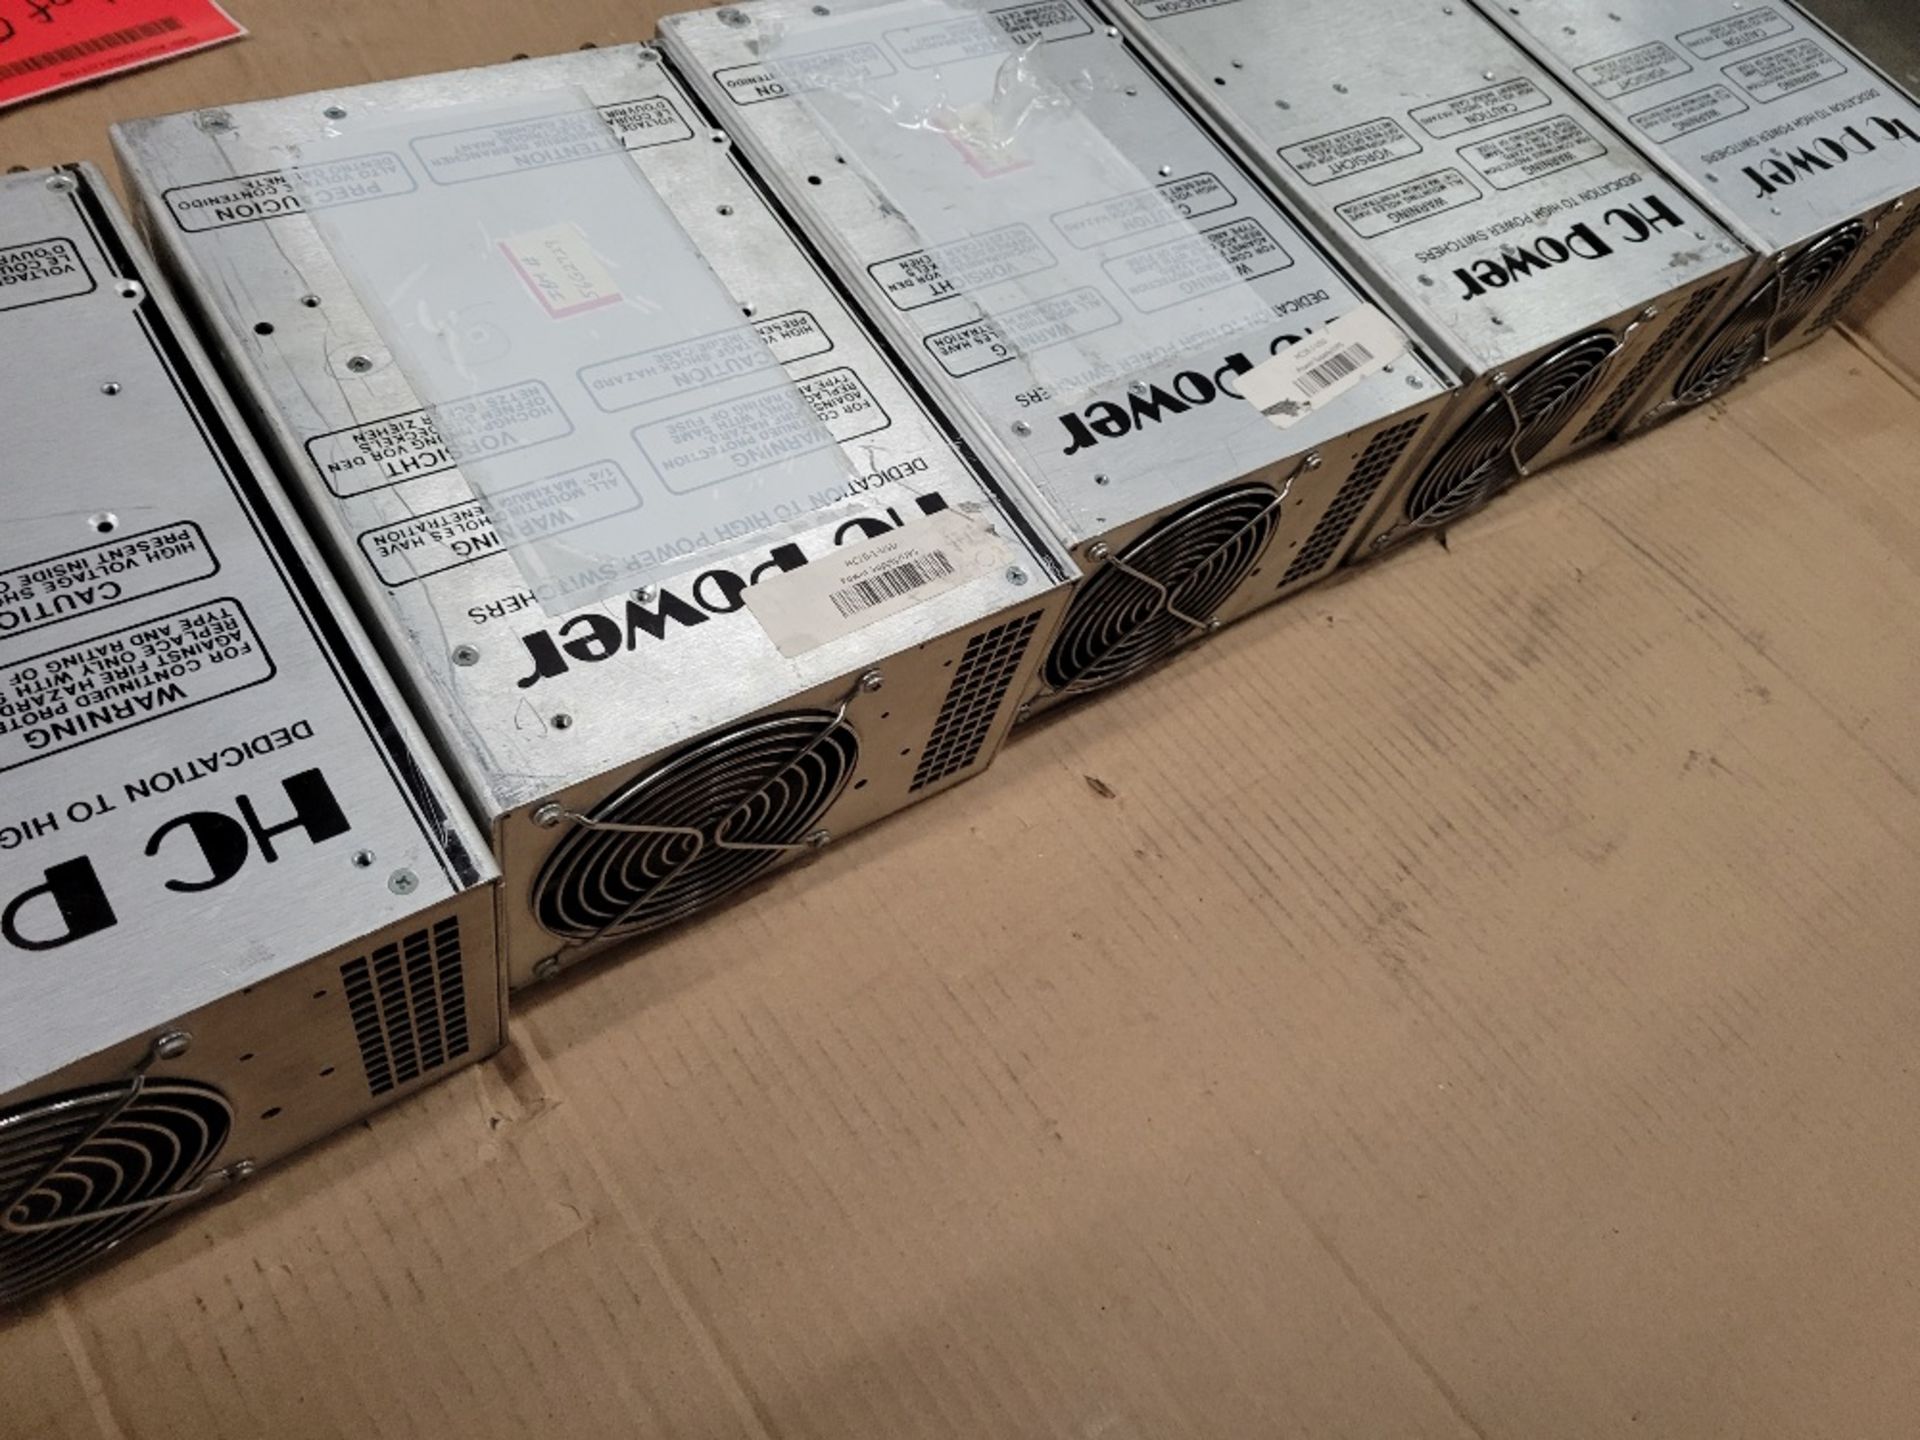 5x HC Power Used Surplus HC18-1 Other Power Supplies 20A:360A 230VAC:5V - Image 5 of 5